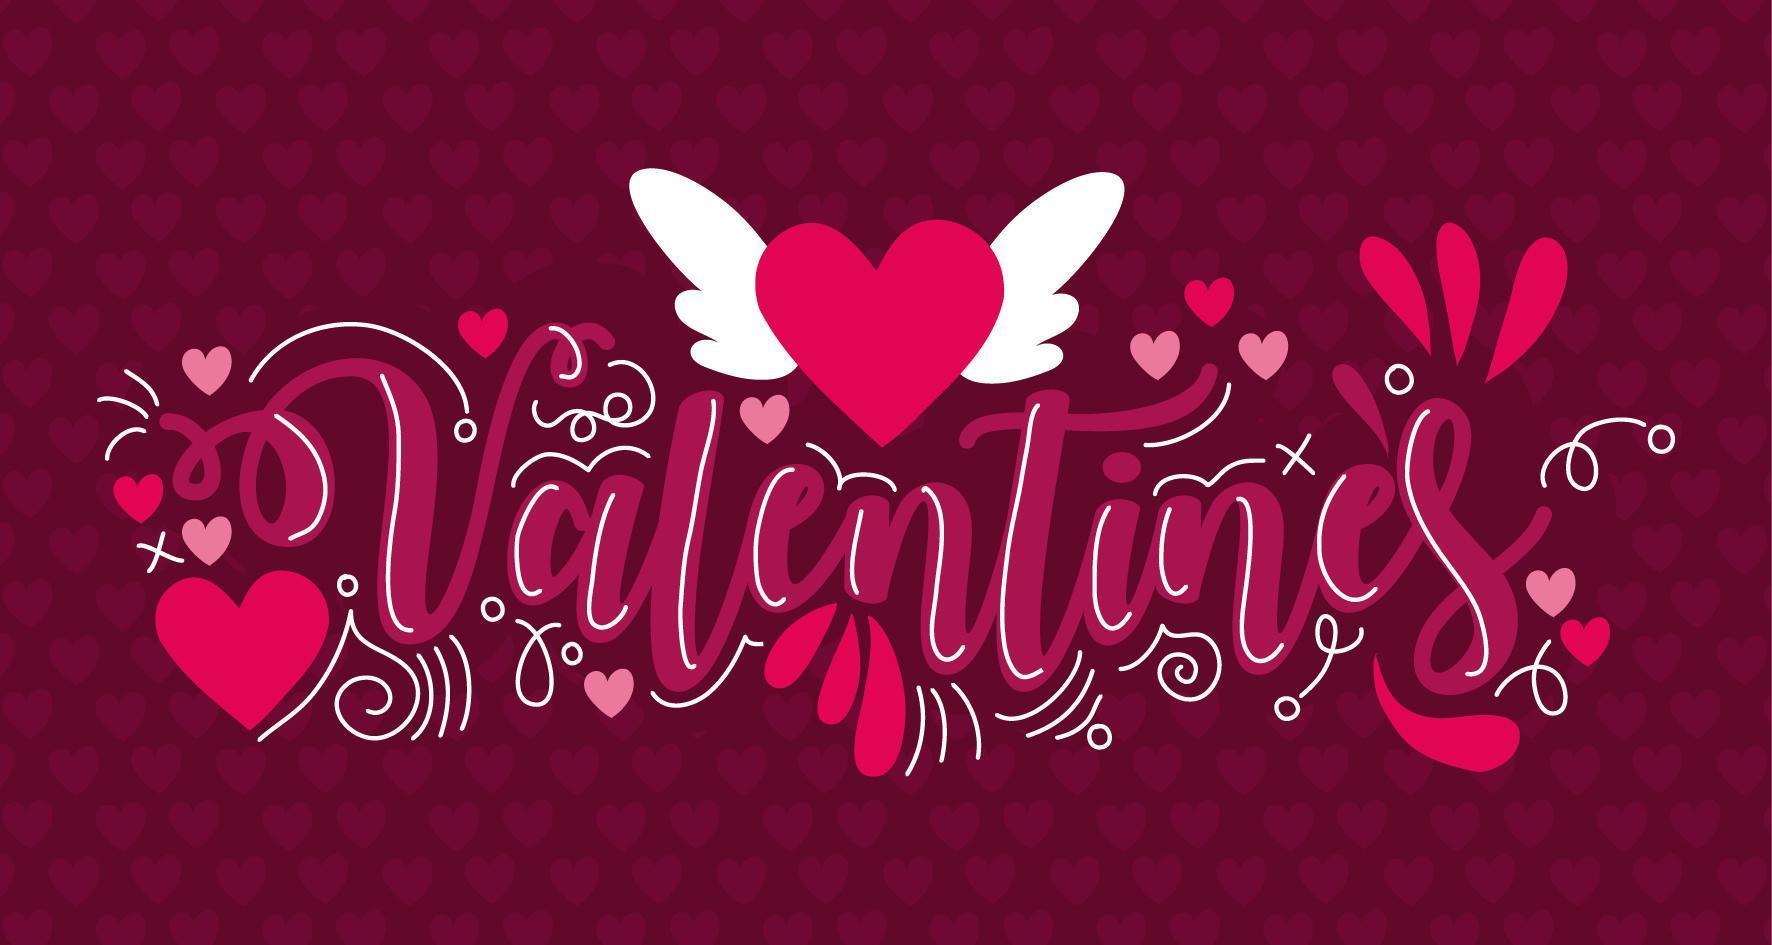 Happy Valentine's Day card with heart flying vector